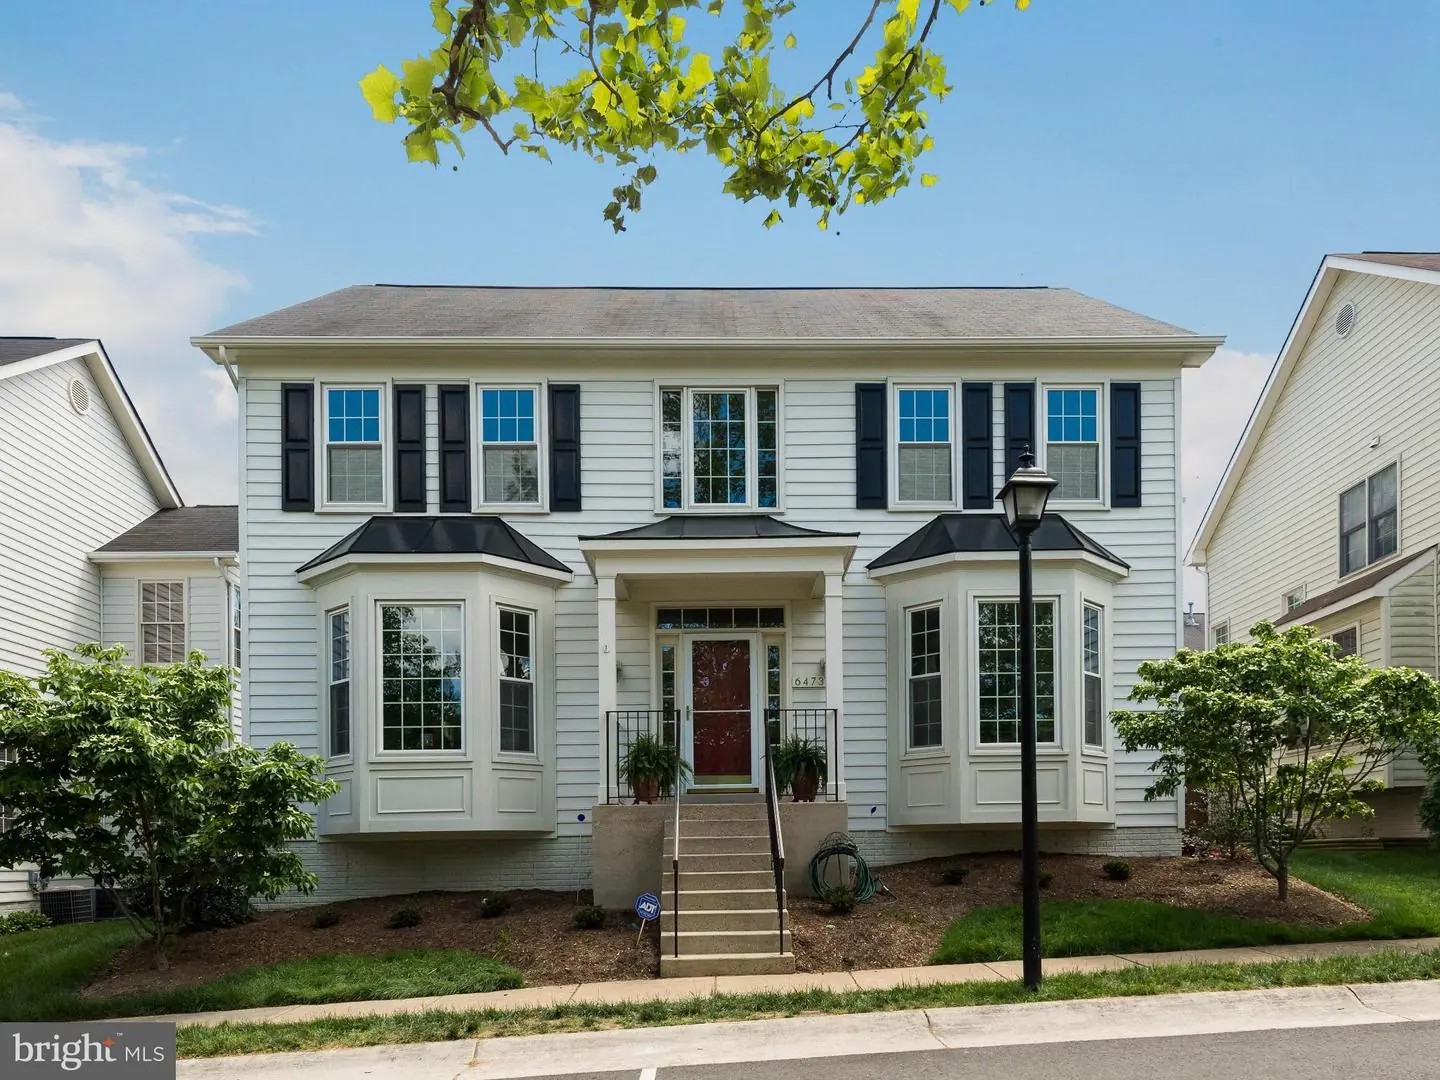 1002166507-121242701193-2021-09-05-22-36-58  |  Windy Hill At Lincolnia | Alexandria Delaware Real Estate For Sale | MLS# 1002166507  - Best of Northern Virginia